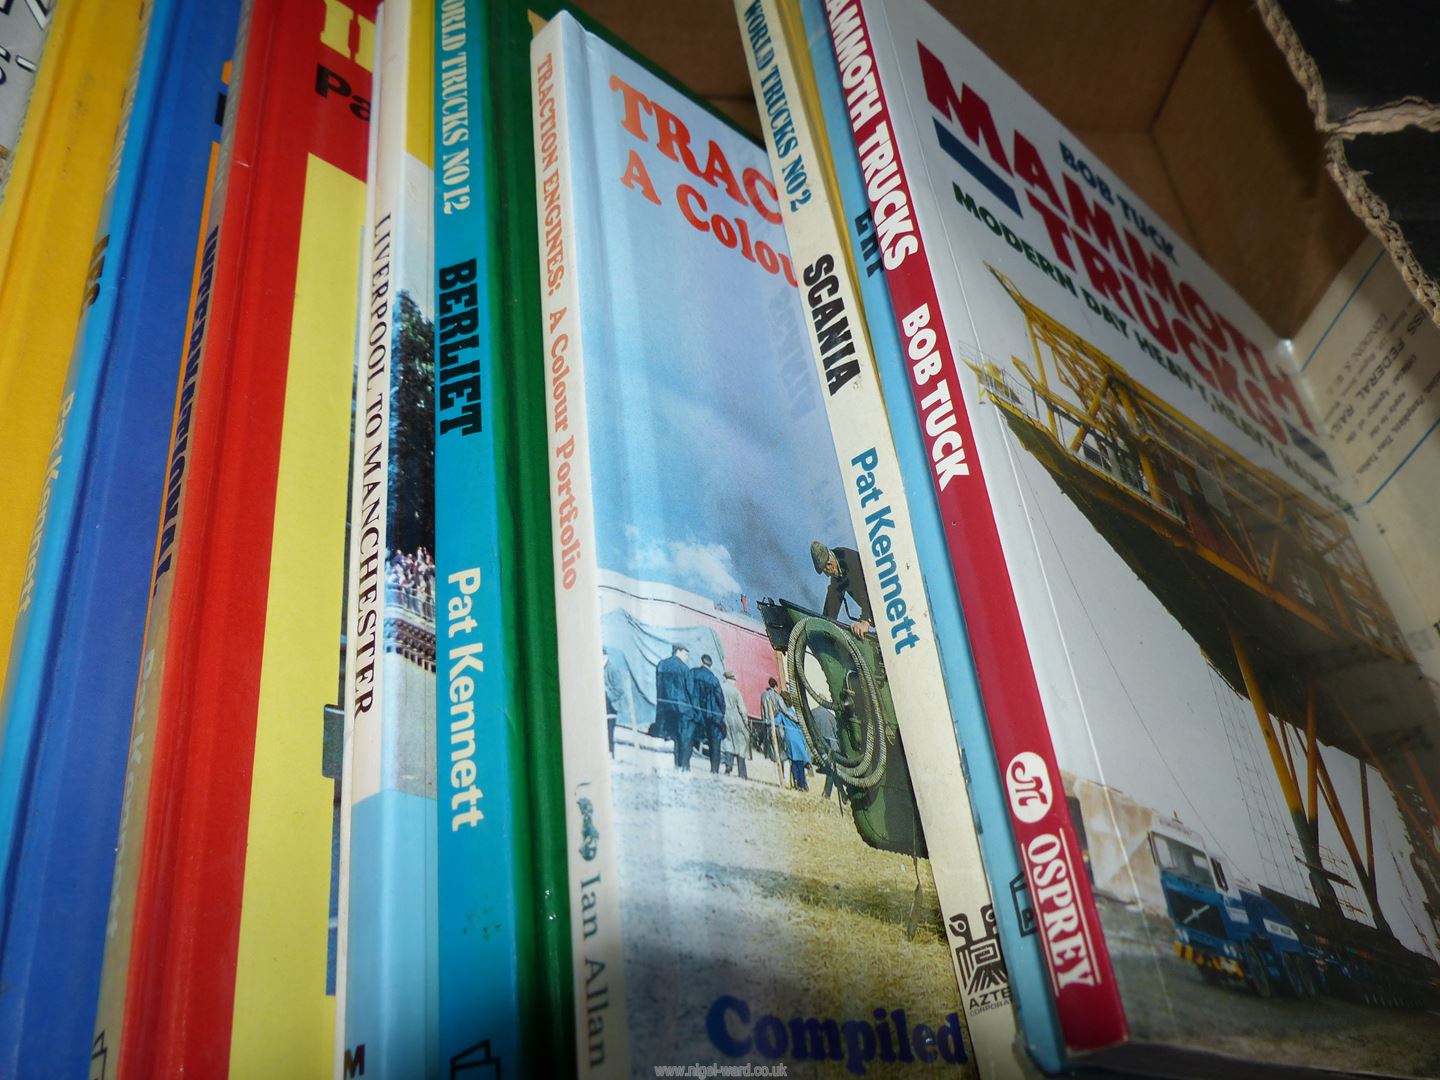 A box of train and truck books to include; Mammoth Trucks, Scania, North Eastern Steam, - Image 4 of 4